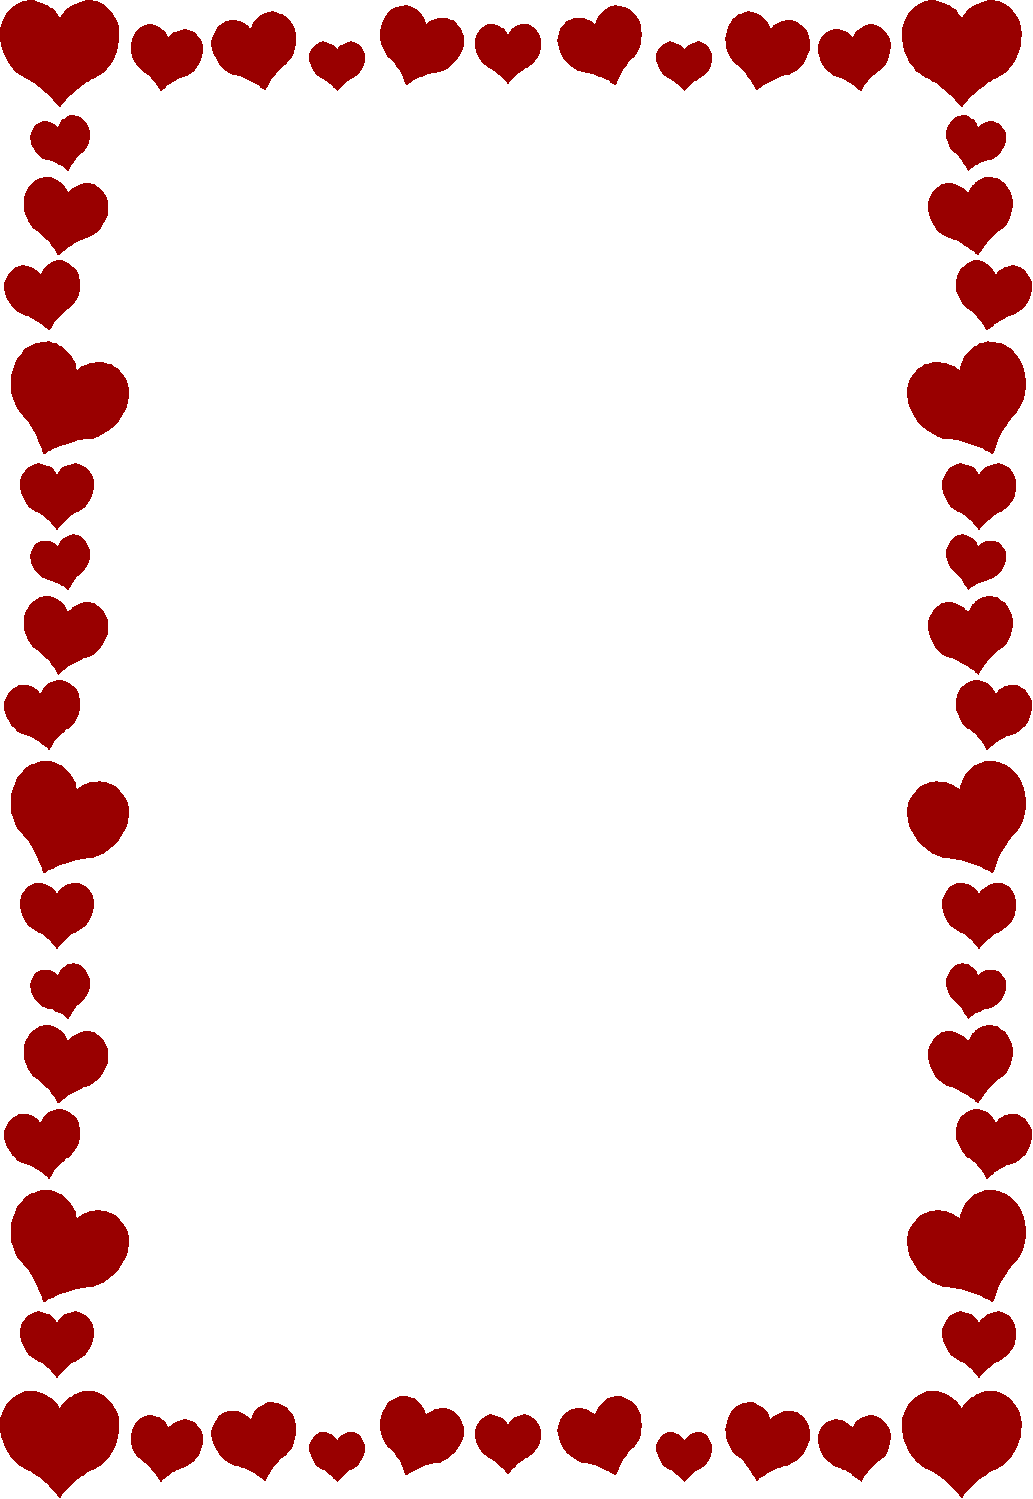 Heart Background Clipart | Free Download Clip Art | Free Clip Art ...